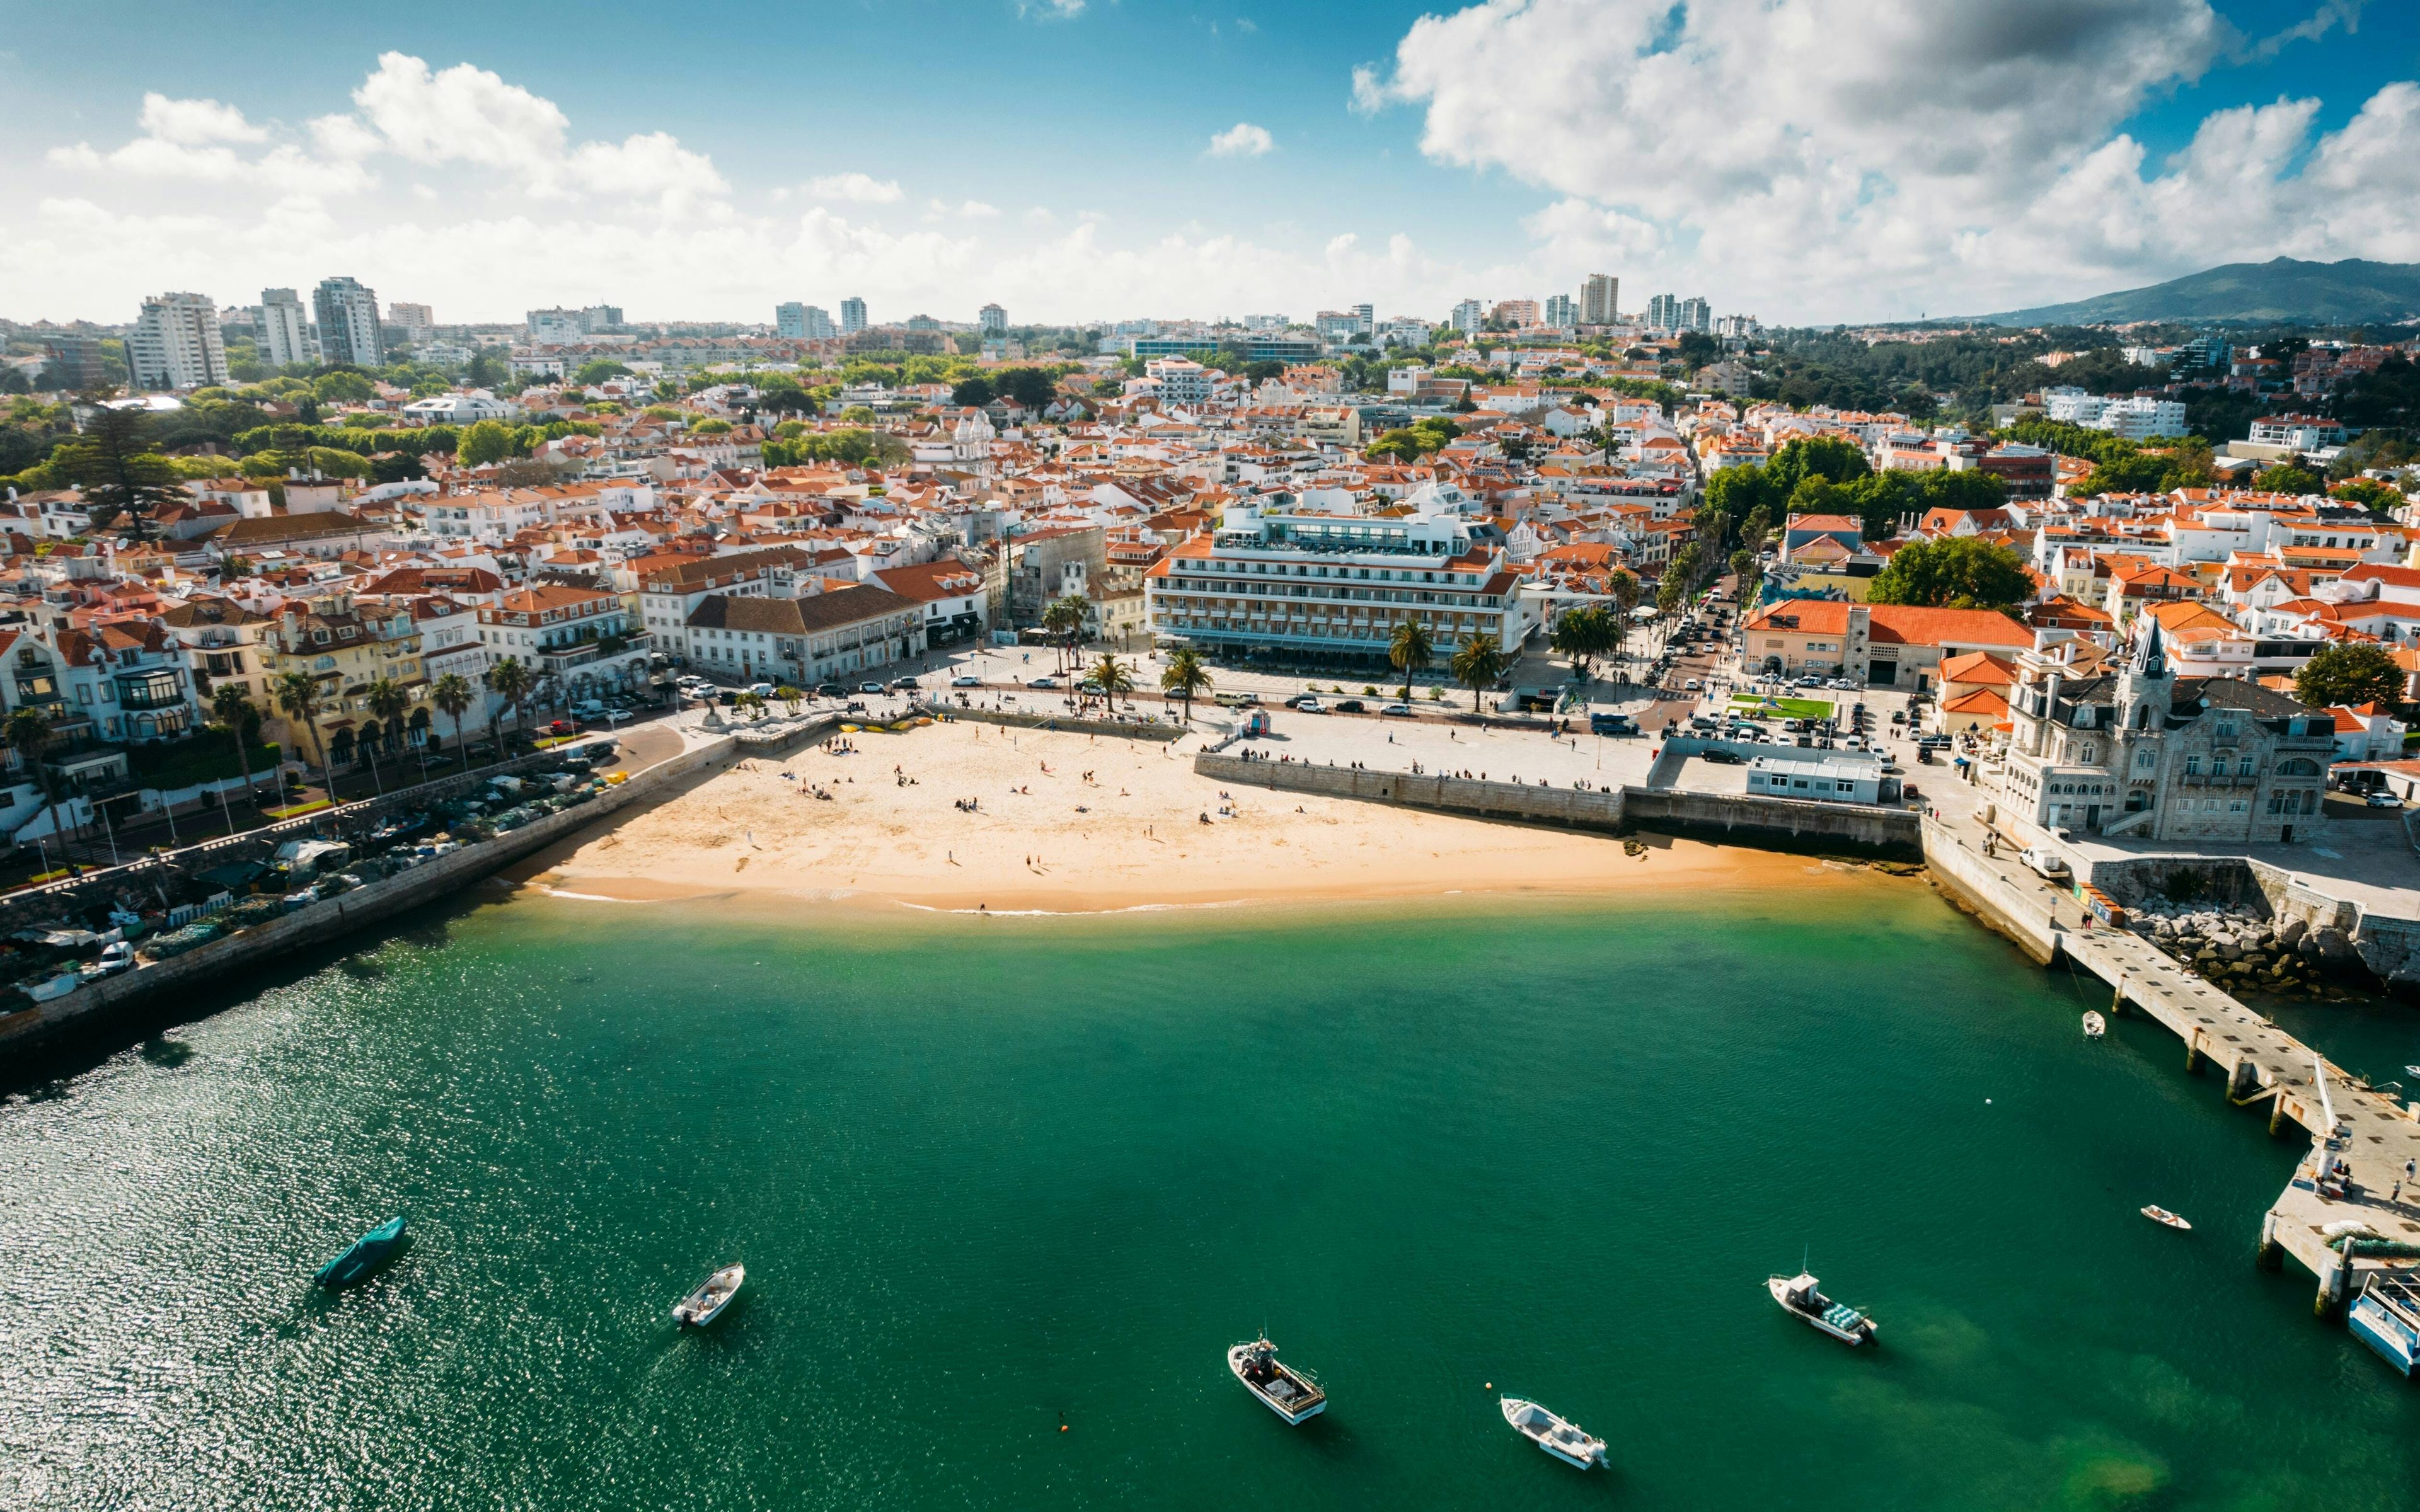 View of Cascais bay with clear green waters, overlooking the City Hall and Baía Hotel buildings.